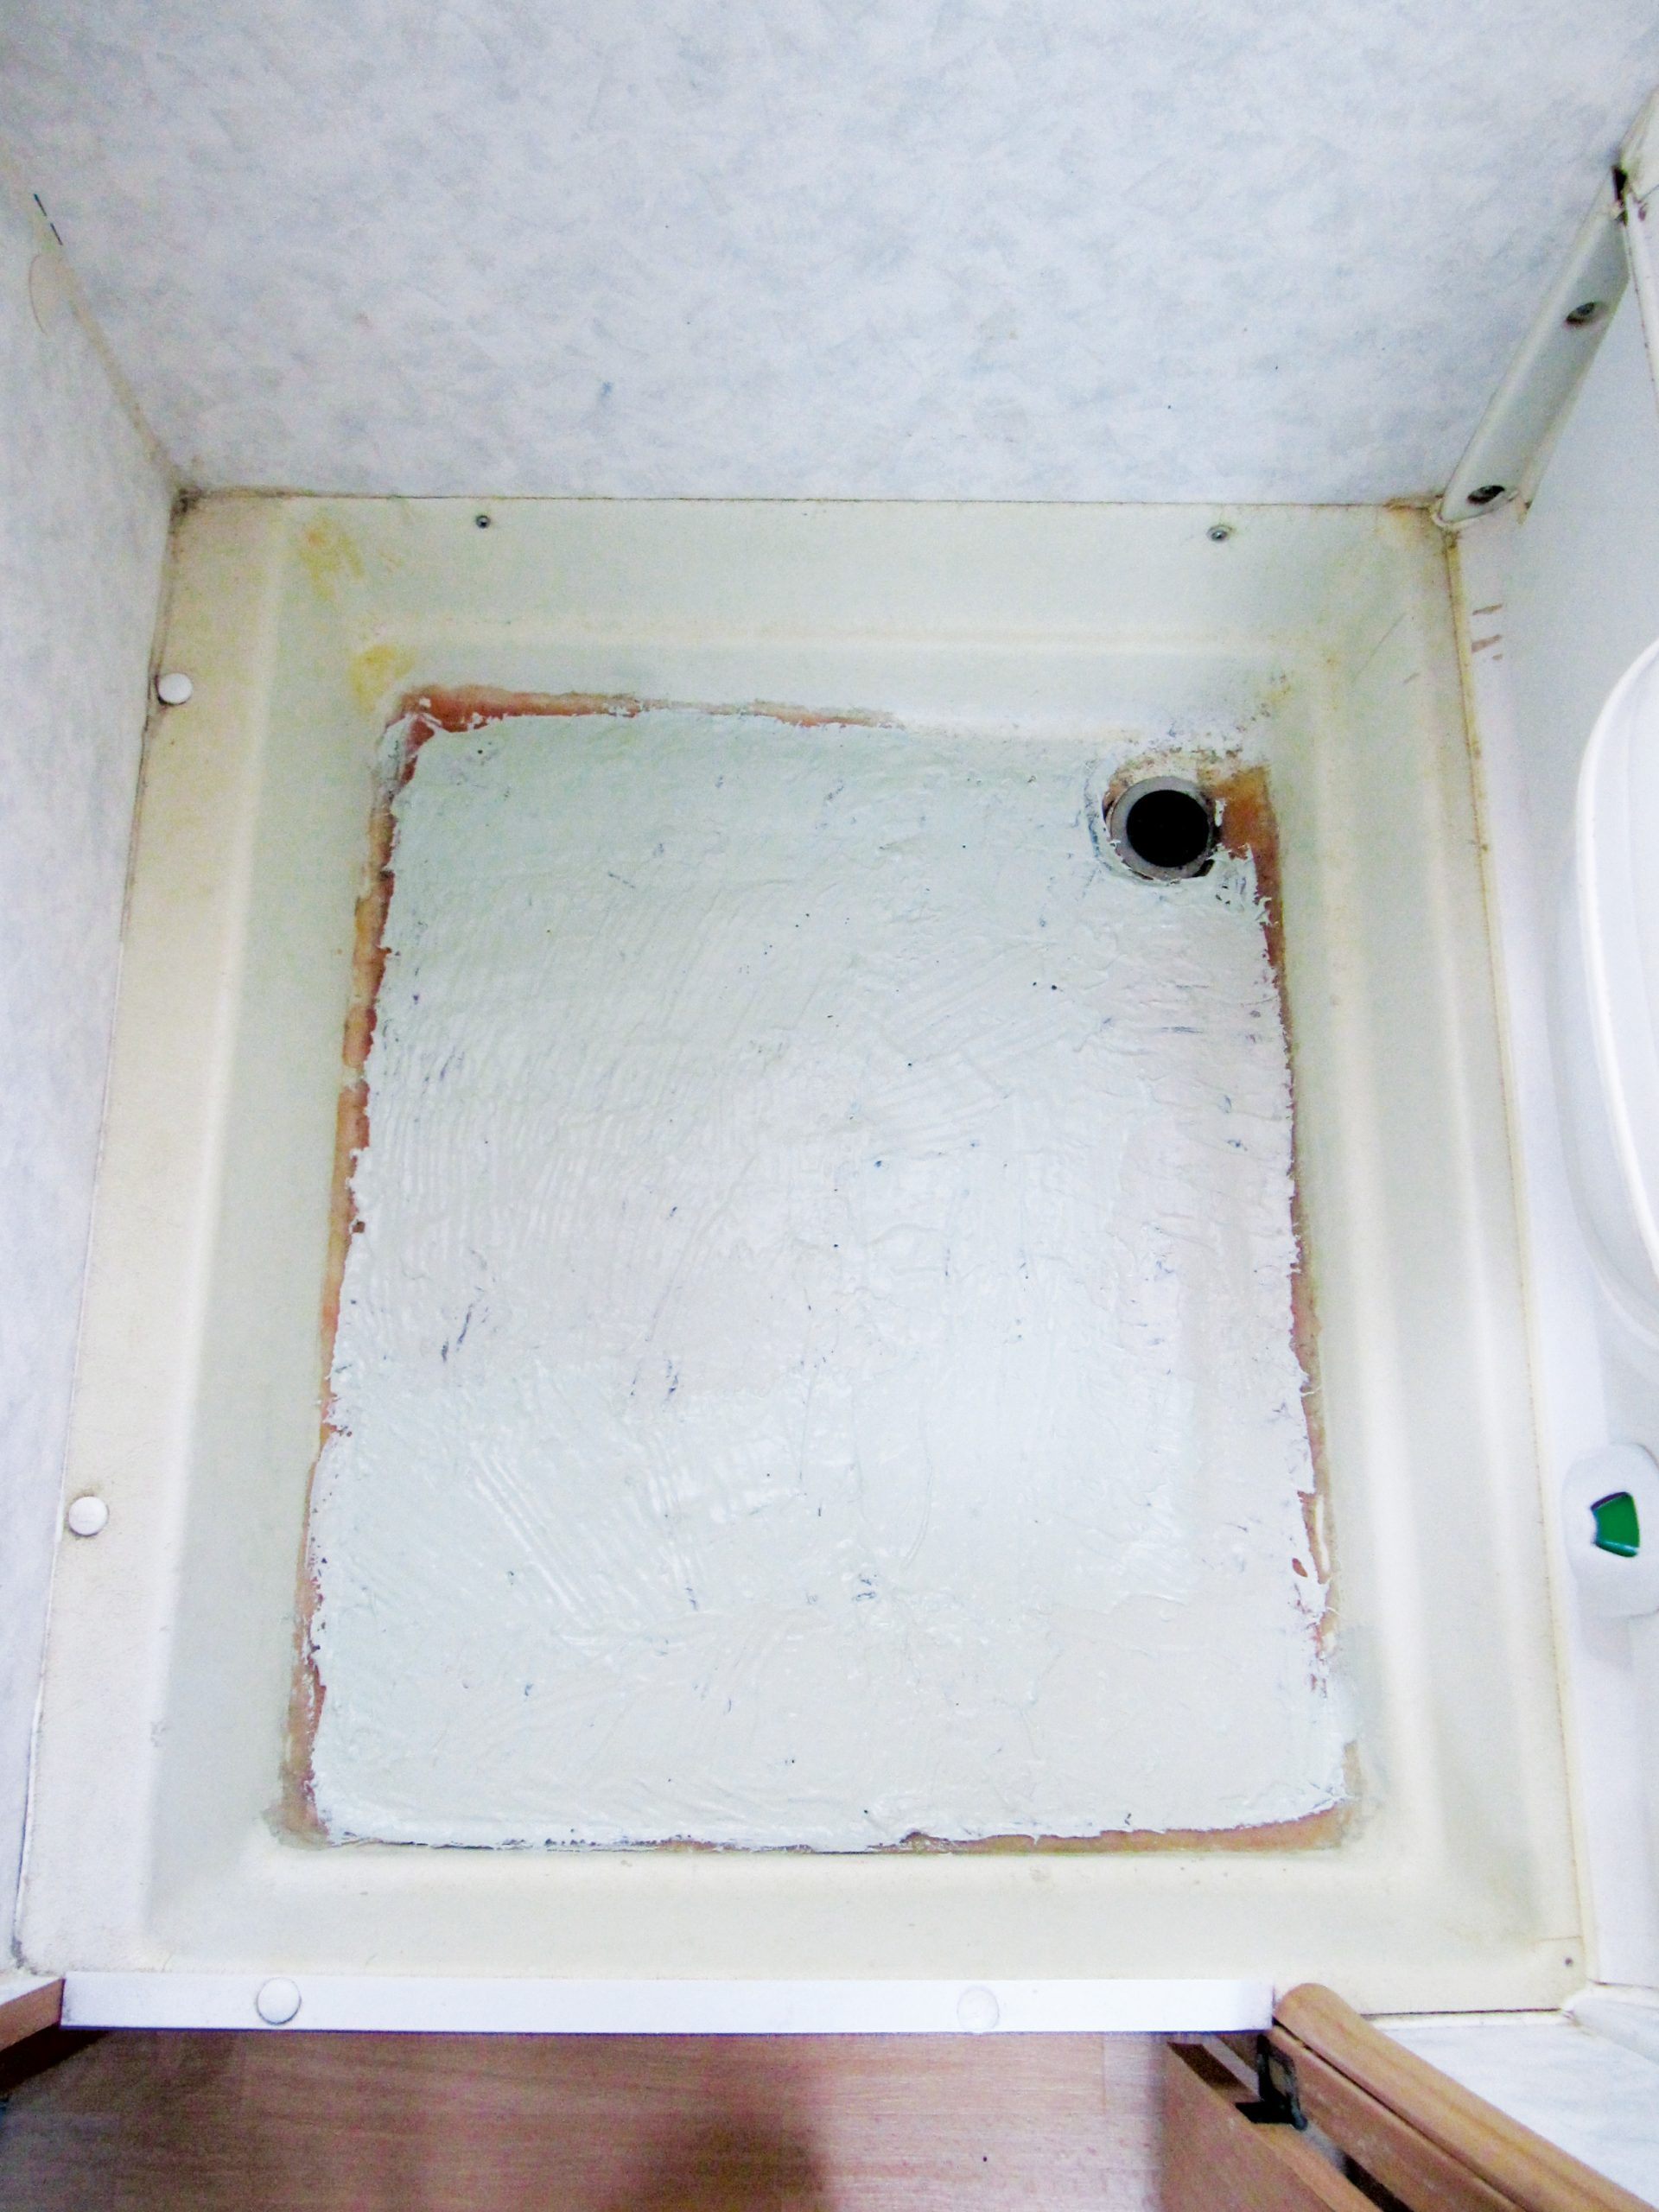 How To Repair A Cracked Shower Tray Practical Motorhome